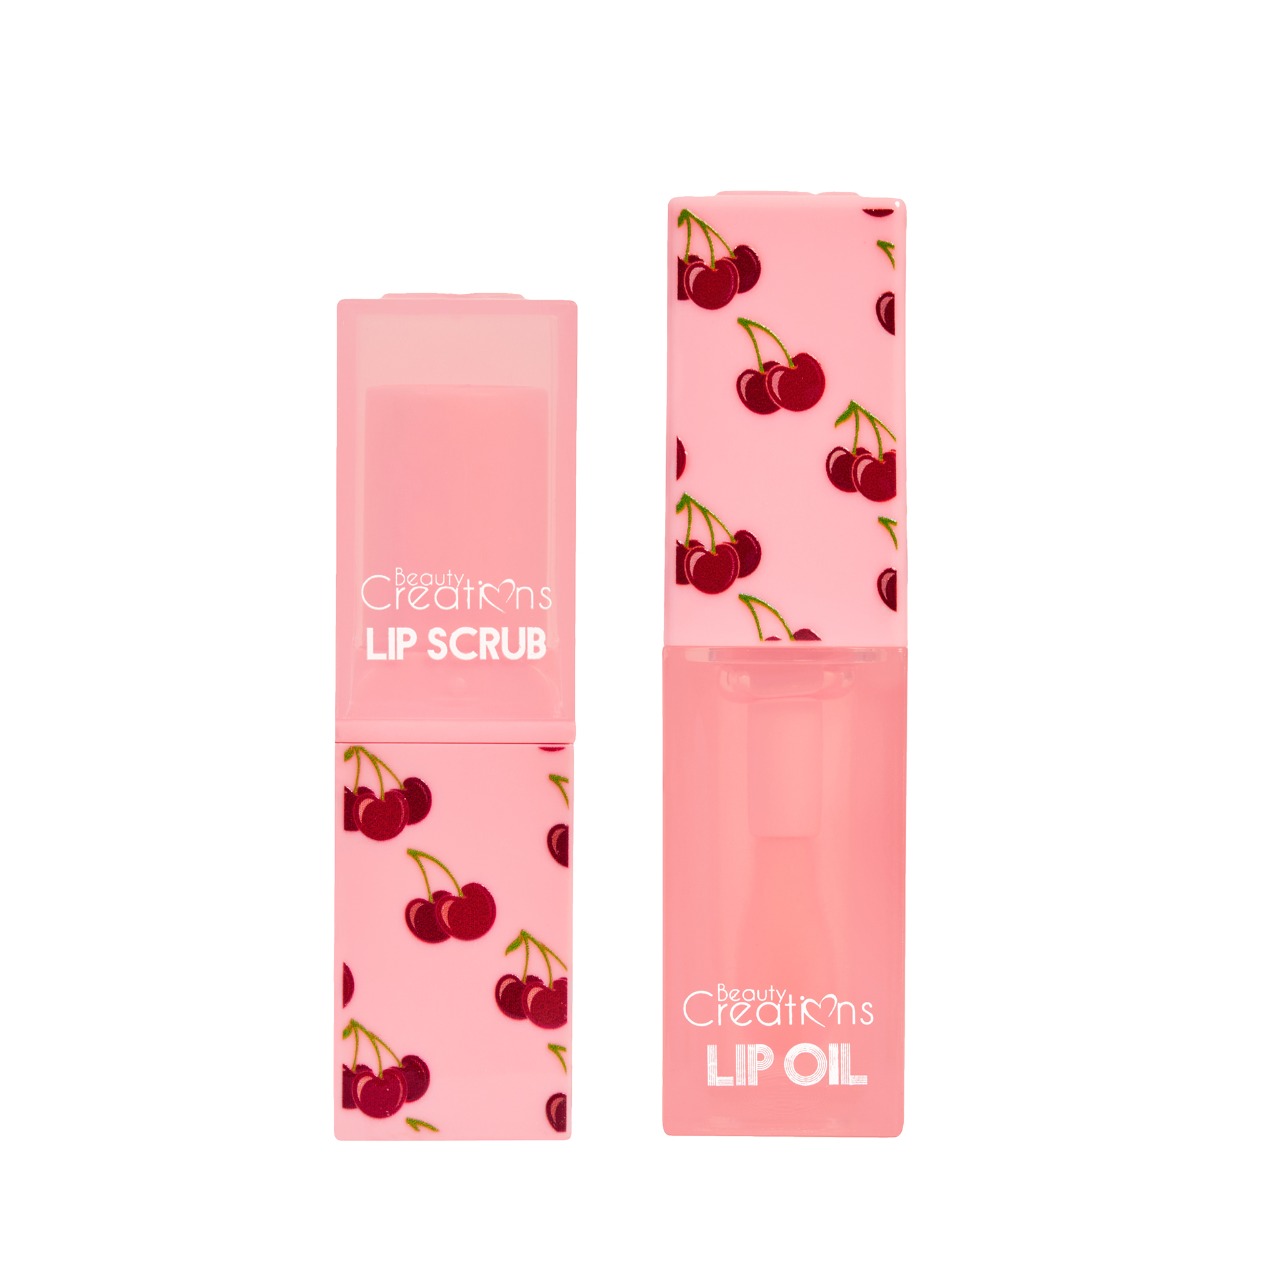 Beauty Creations - Sweet Dose Lip Care Duo Cherry Scented